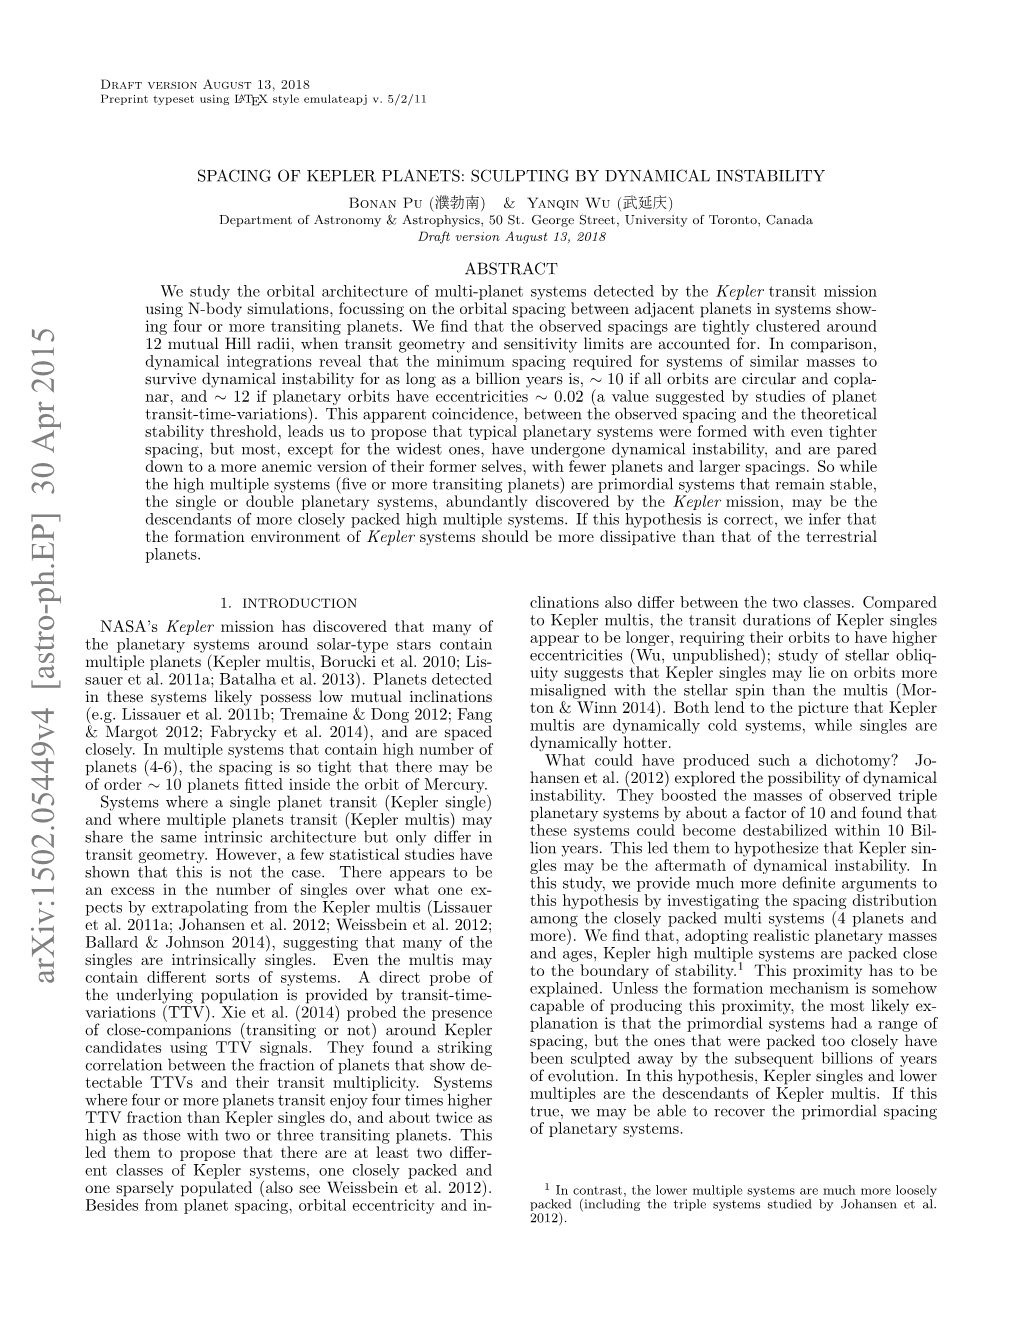 Arxiv:1502.05449V4 [Astro-Ph.EP] 30 Apr 2015 Contain Diﬀerent Sorts of Systems